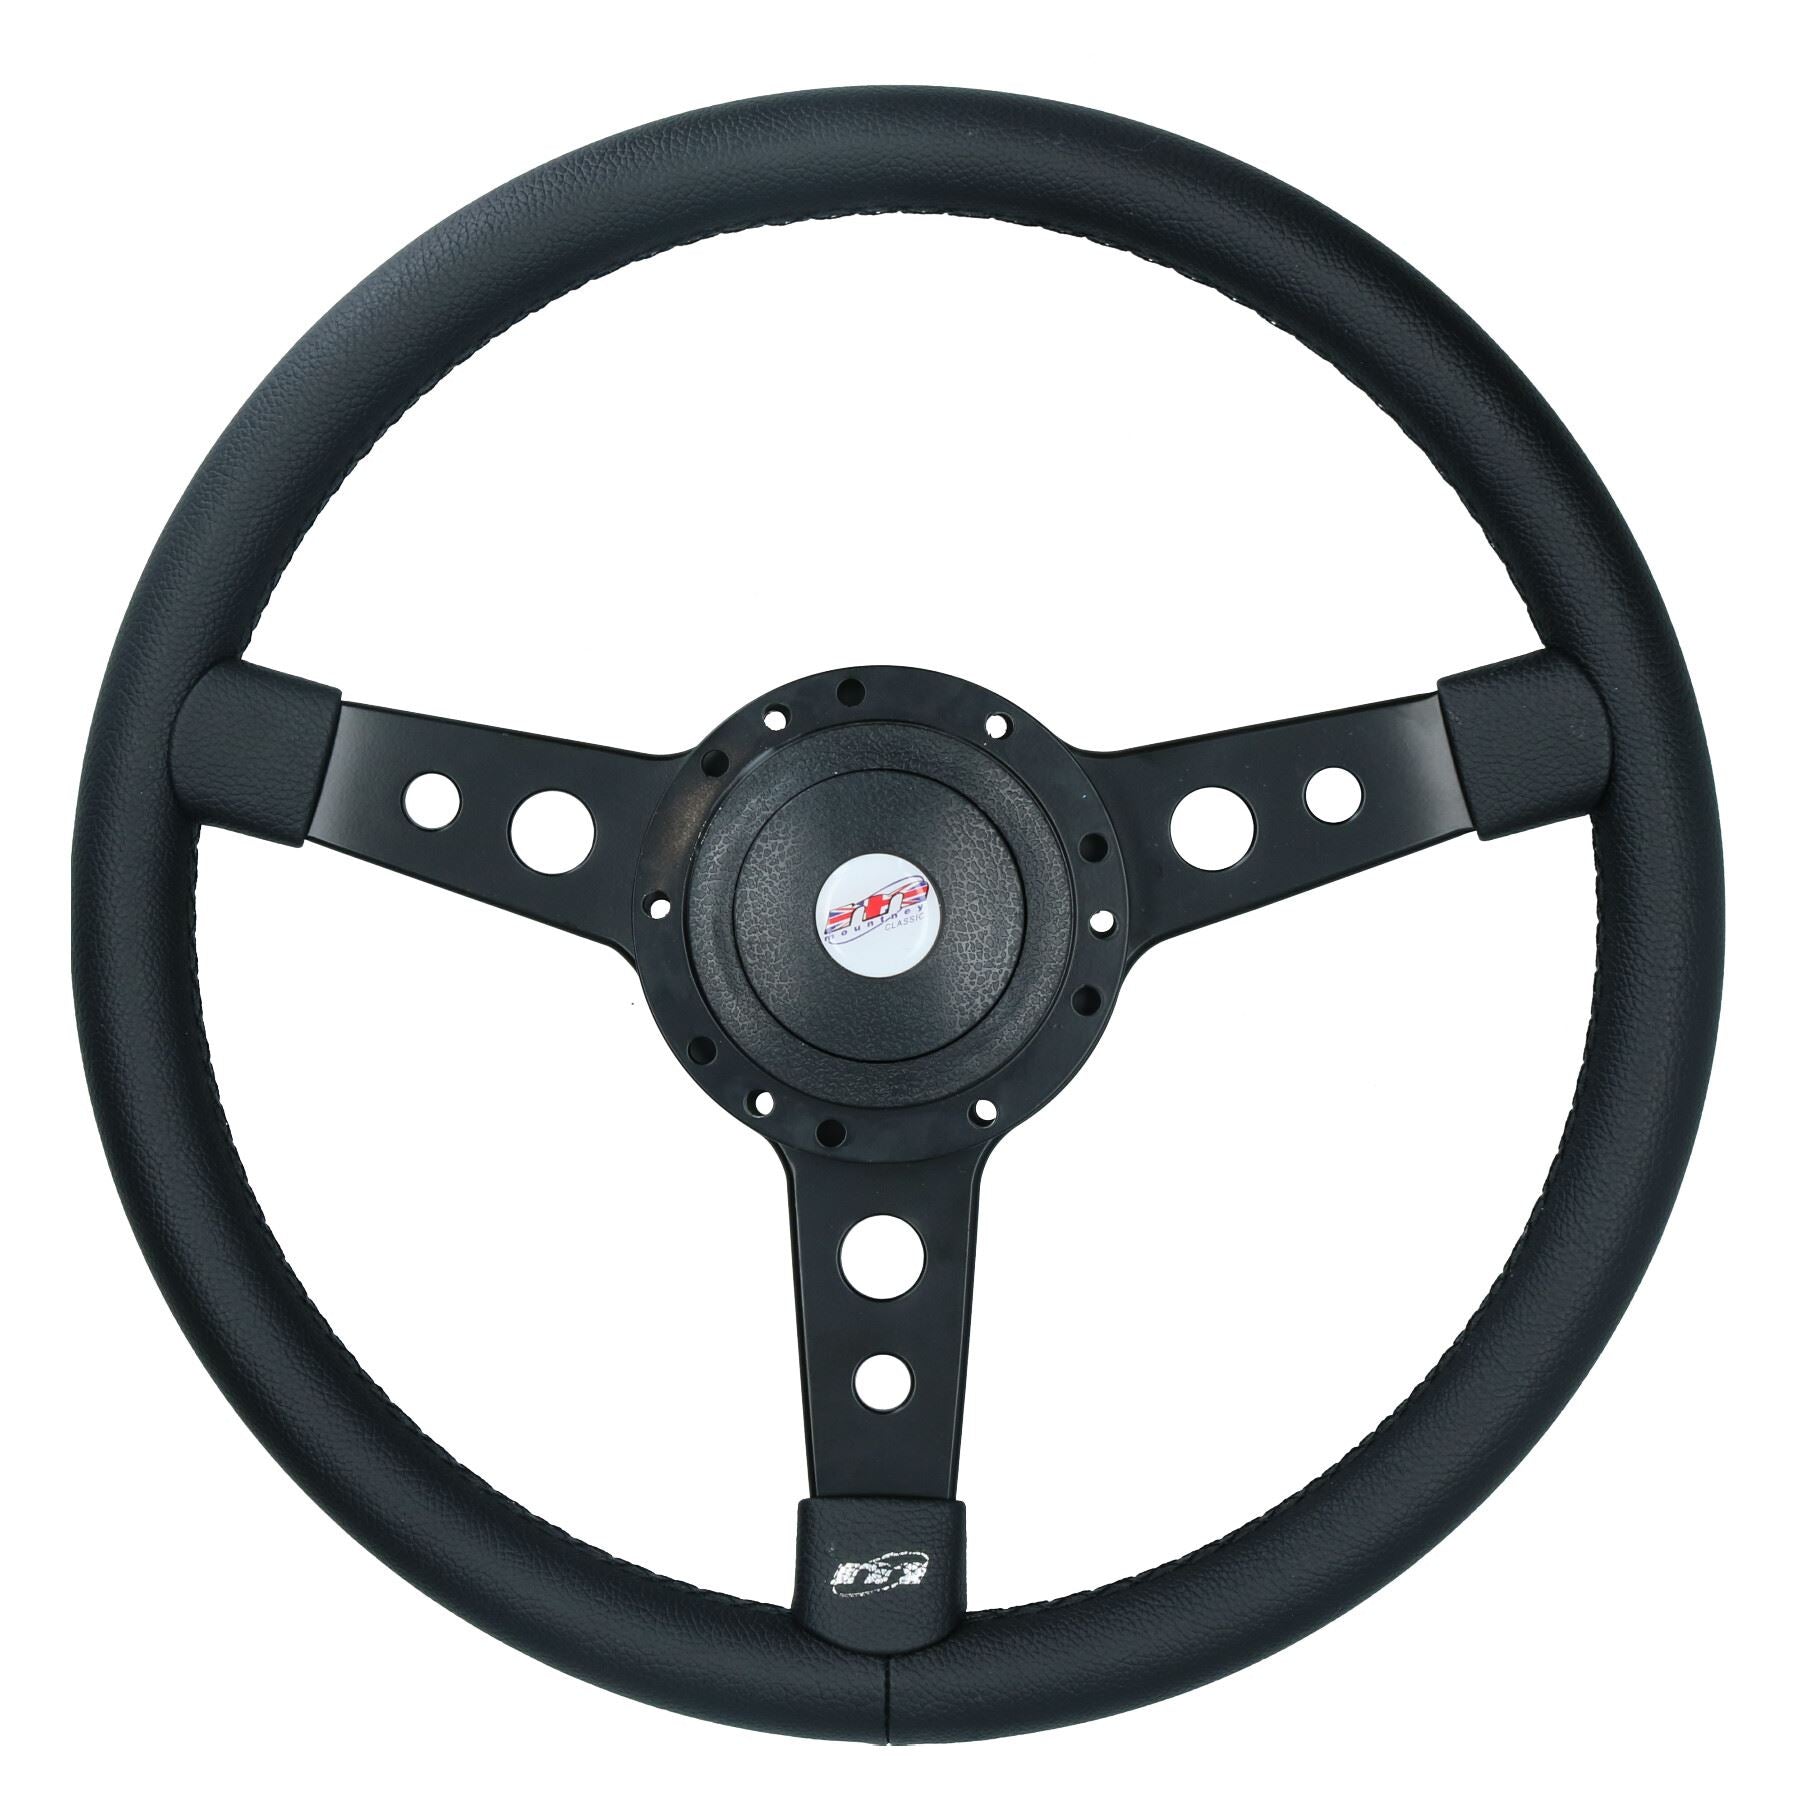 Classic Leather Steering Wheel & Boss to fit Austin / Leyland / Morris Maxi All Years